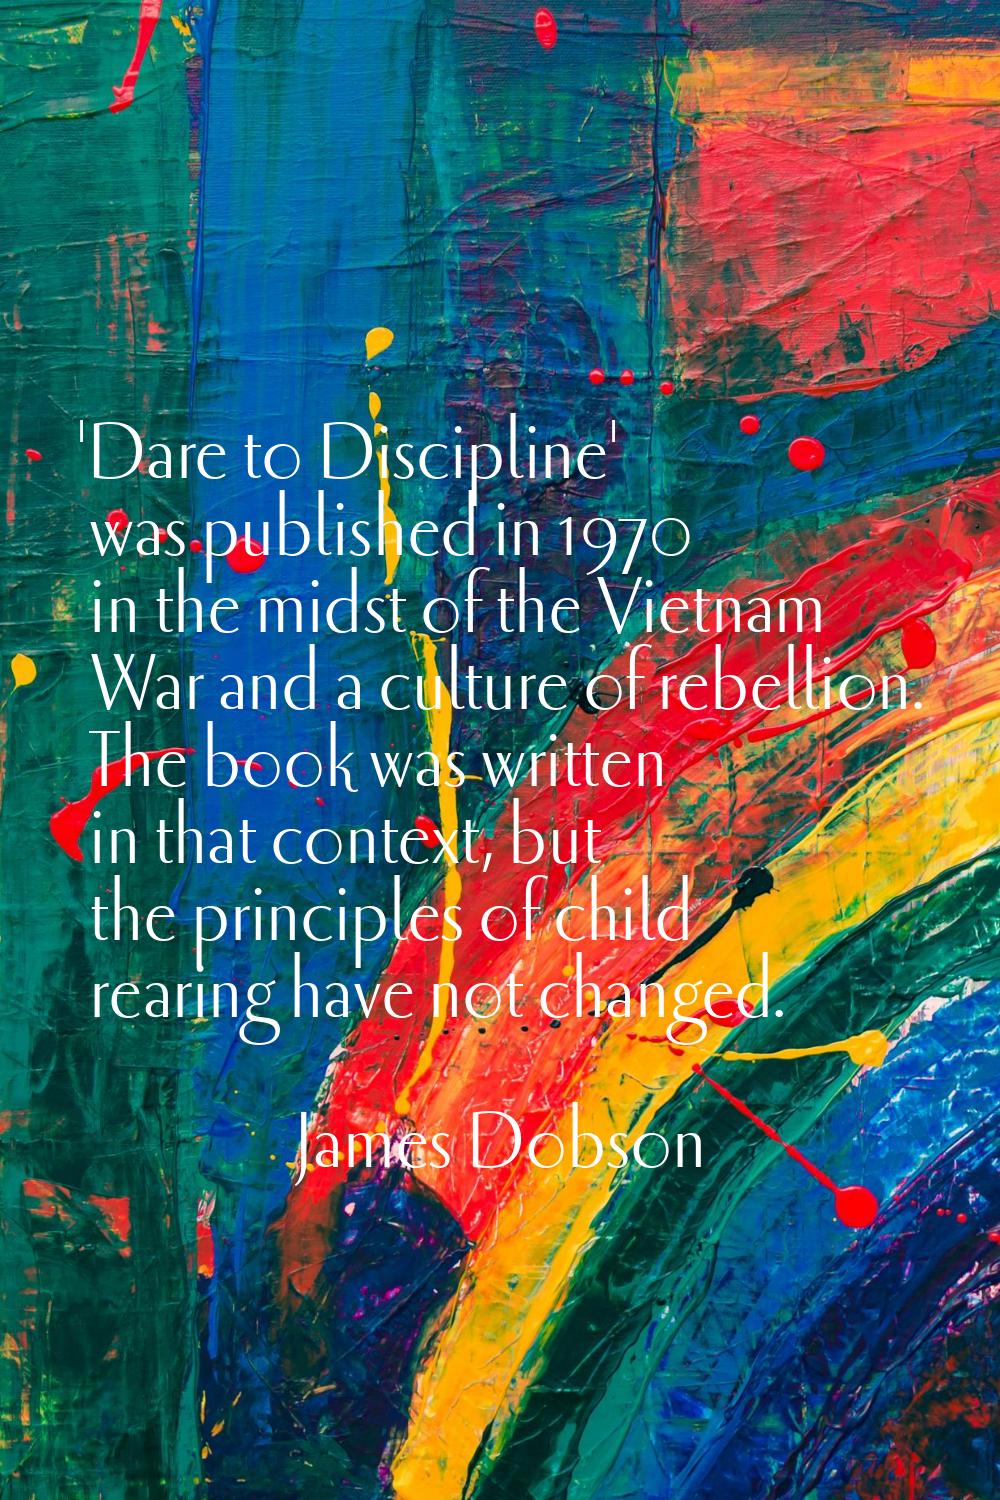 'Dare to Discipline' was published in 1970 in the midst of the Vietnam War and a culture of rebelli